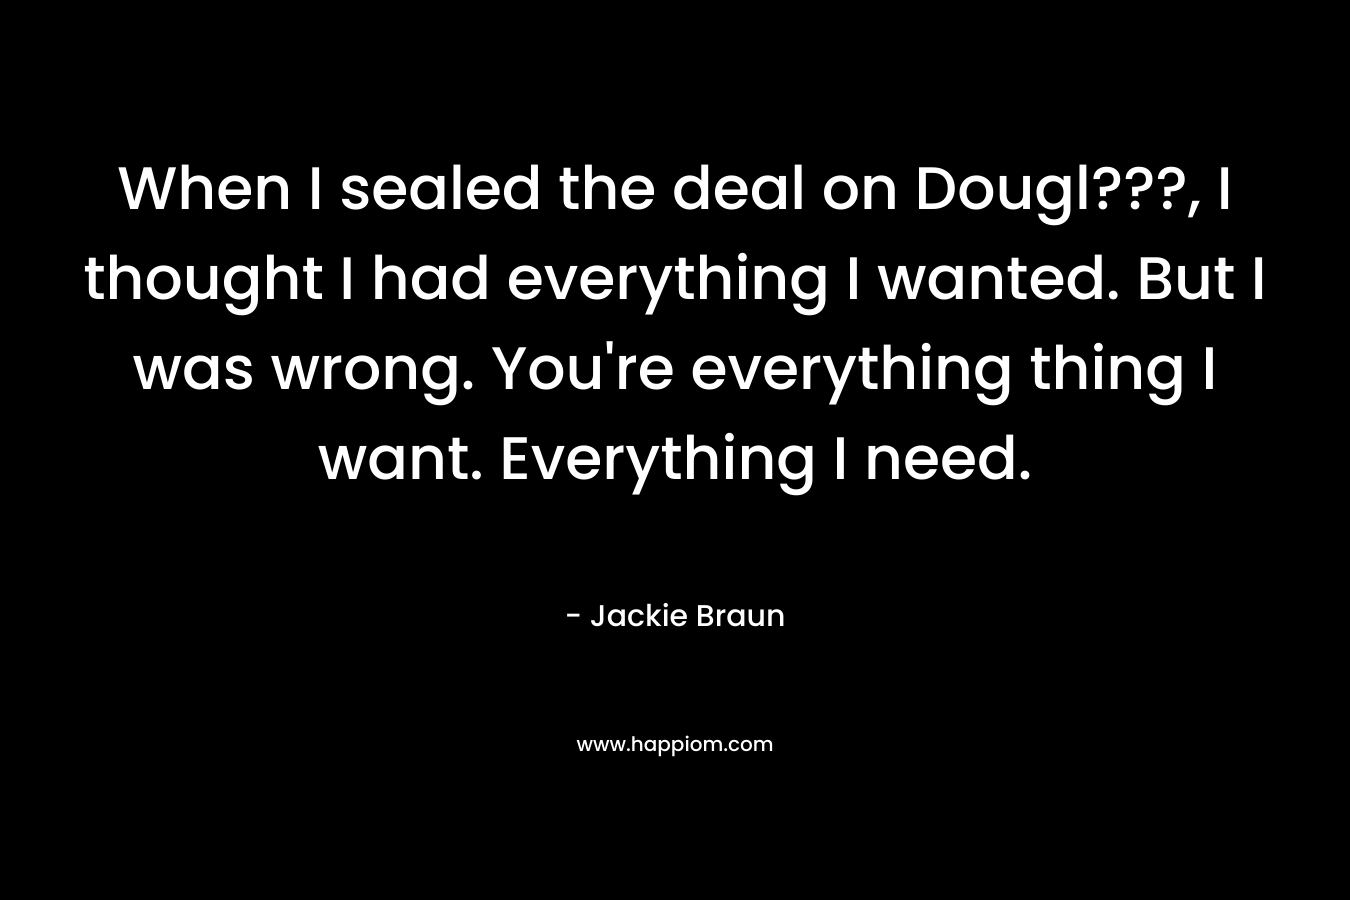 When I sealed the deal on Dougl???, I thought I had everything I wanted. But I was wrong. You're everything thing I want. Everything I need.